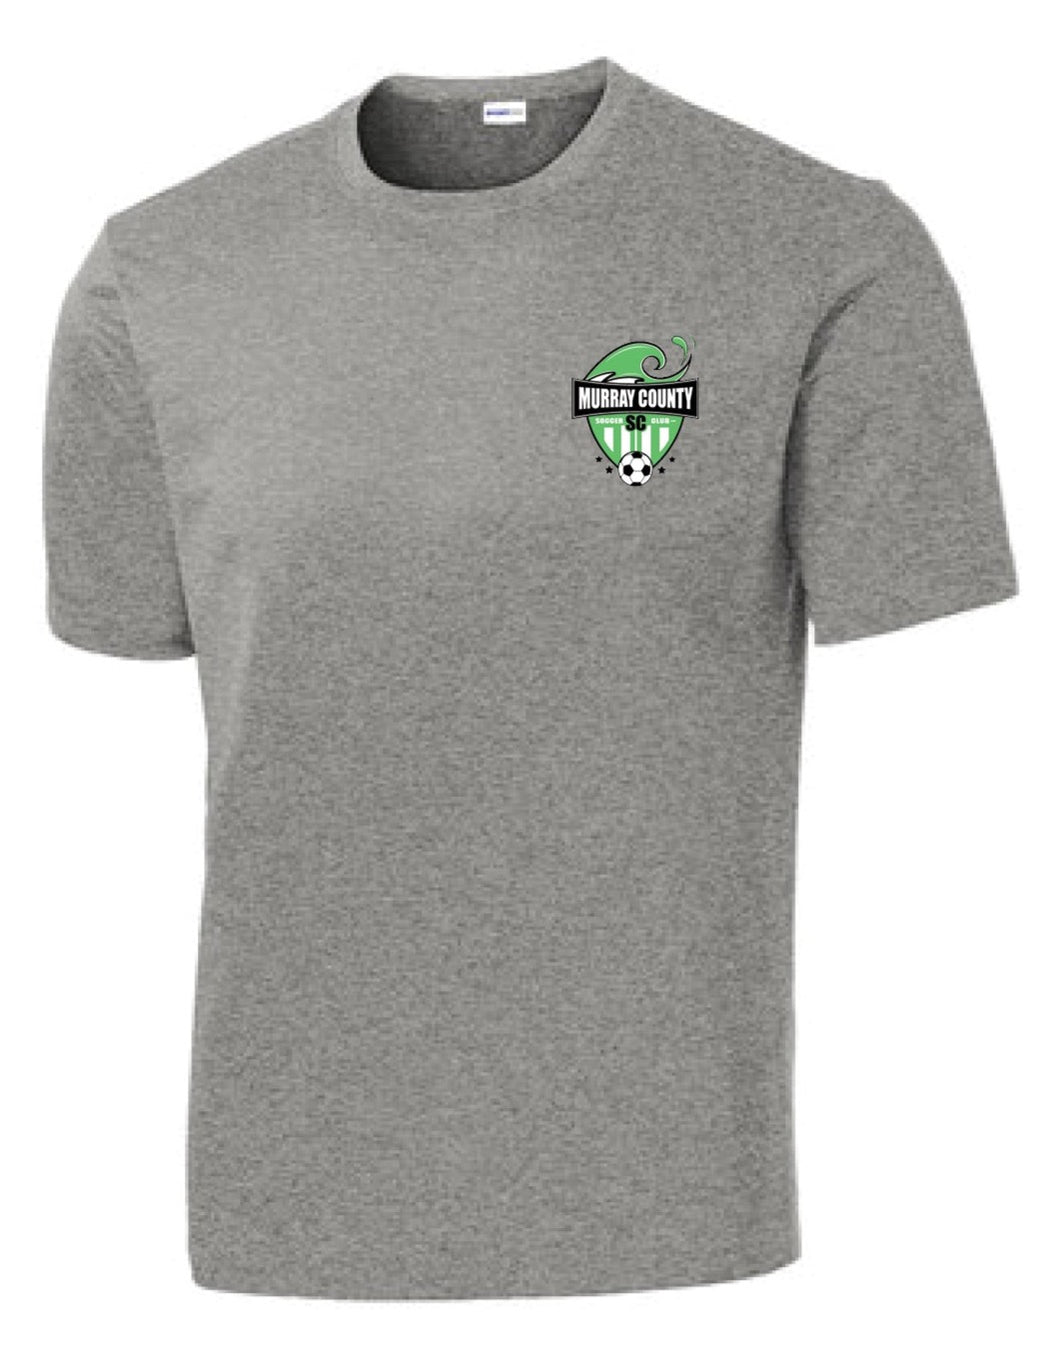 Green Wave Soccer Sport-Tee PosiCharge Competitor Tee